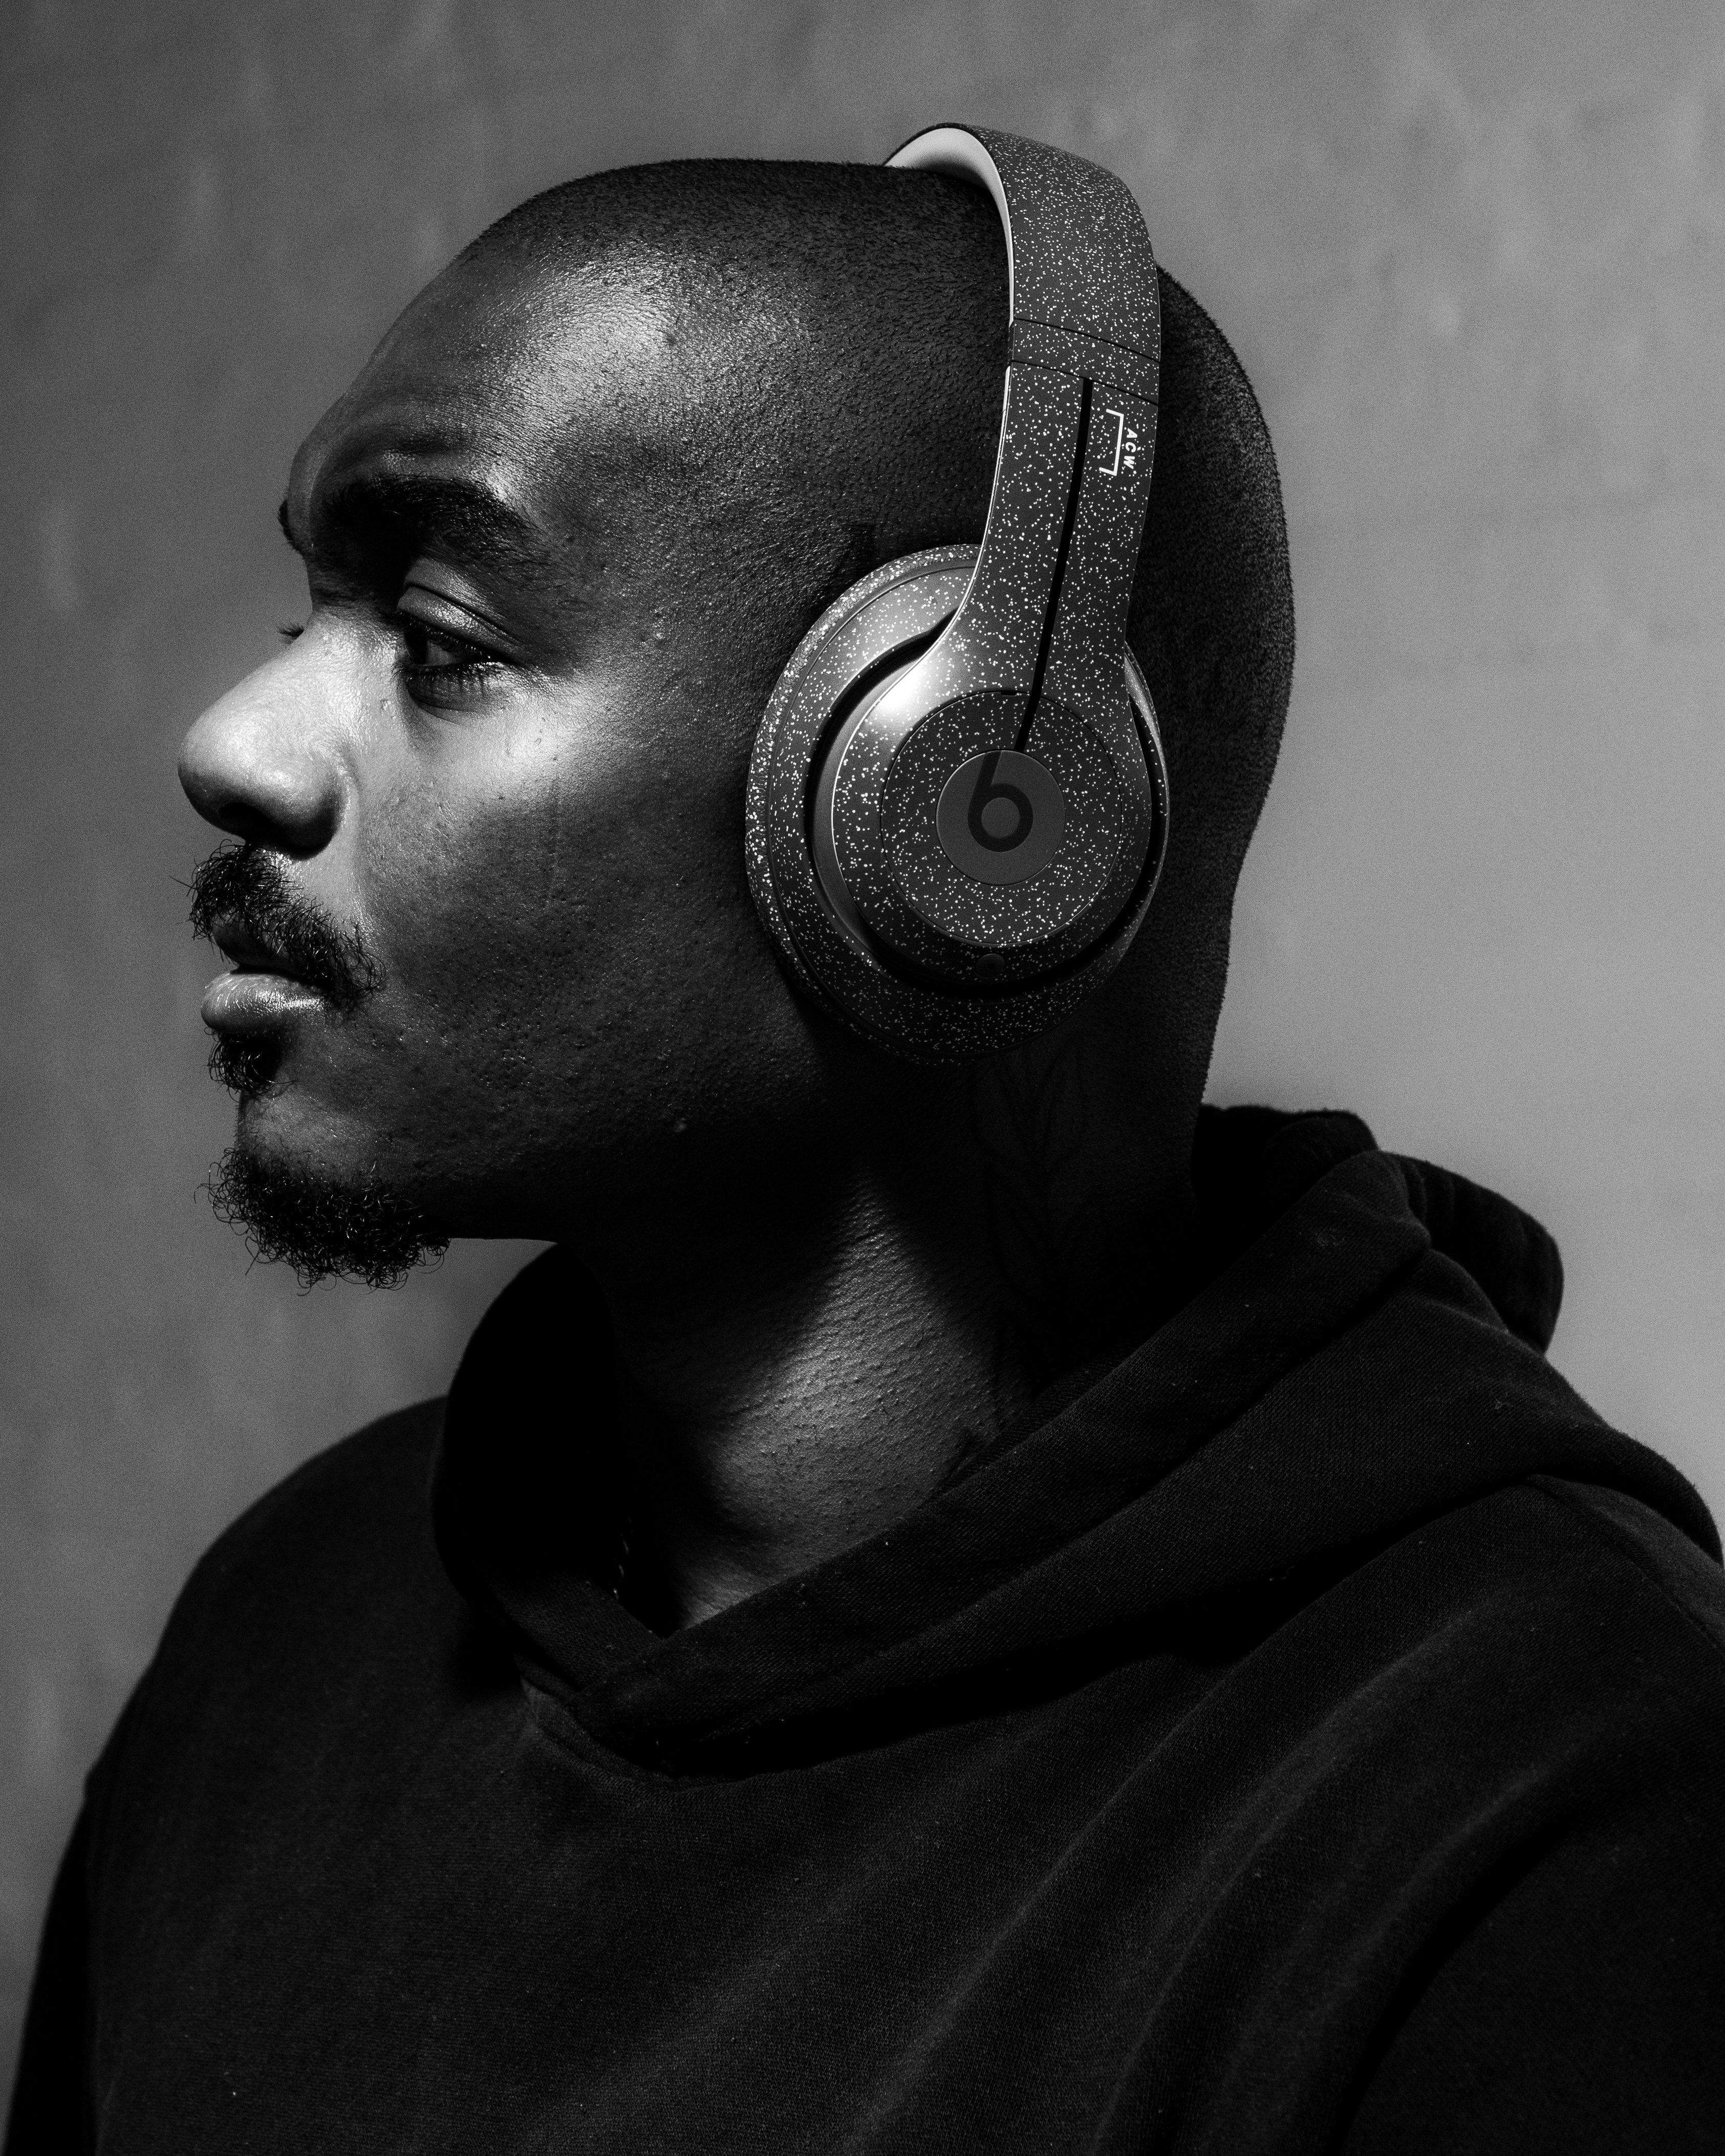 A-Cold-Wall* and Beats' Studio3 Wireless headphones are more